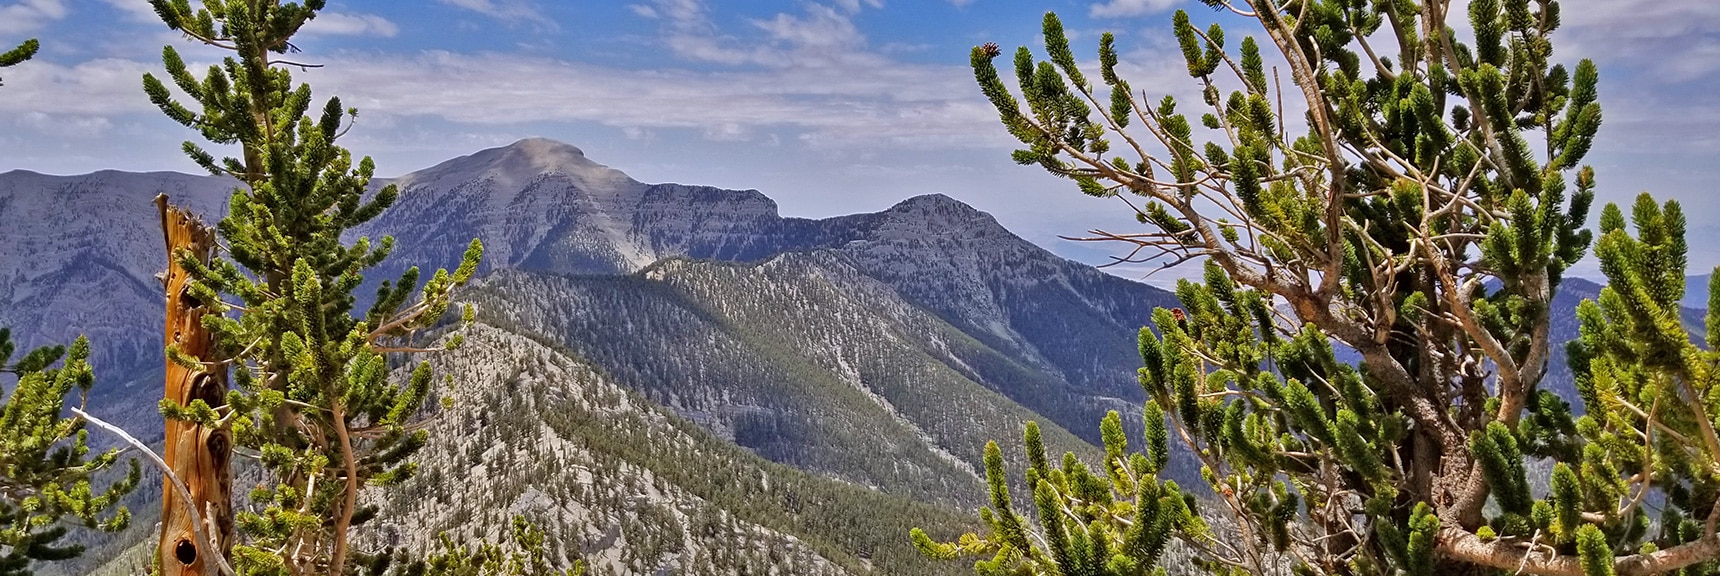 Charleston Peak and Lee Peak Framed Between Ancient Bristlecone Pines At the Base of Mummy's NW Cliffs | Mummy Mountain NW Cliffs | Mt Charleston Wilderness | Spring Mountains, Nevada